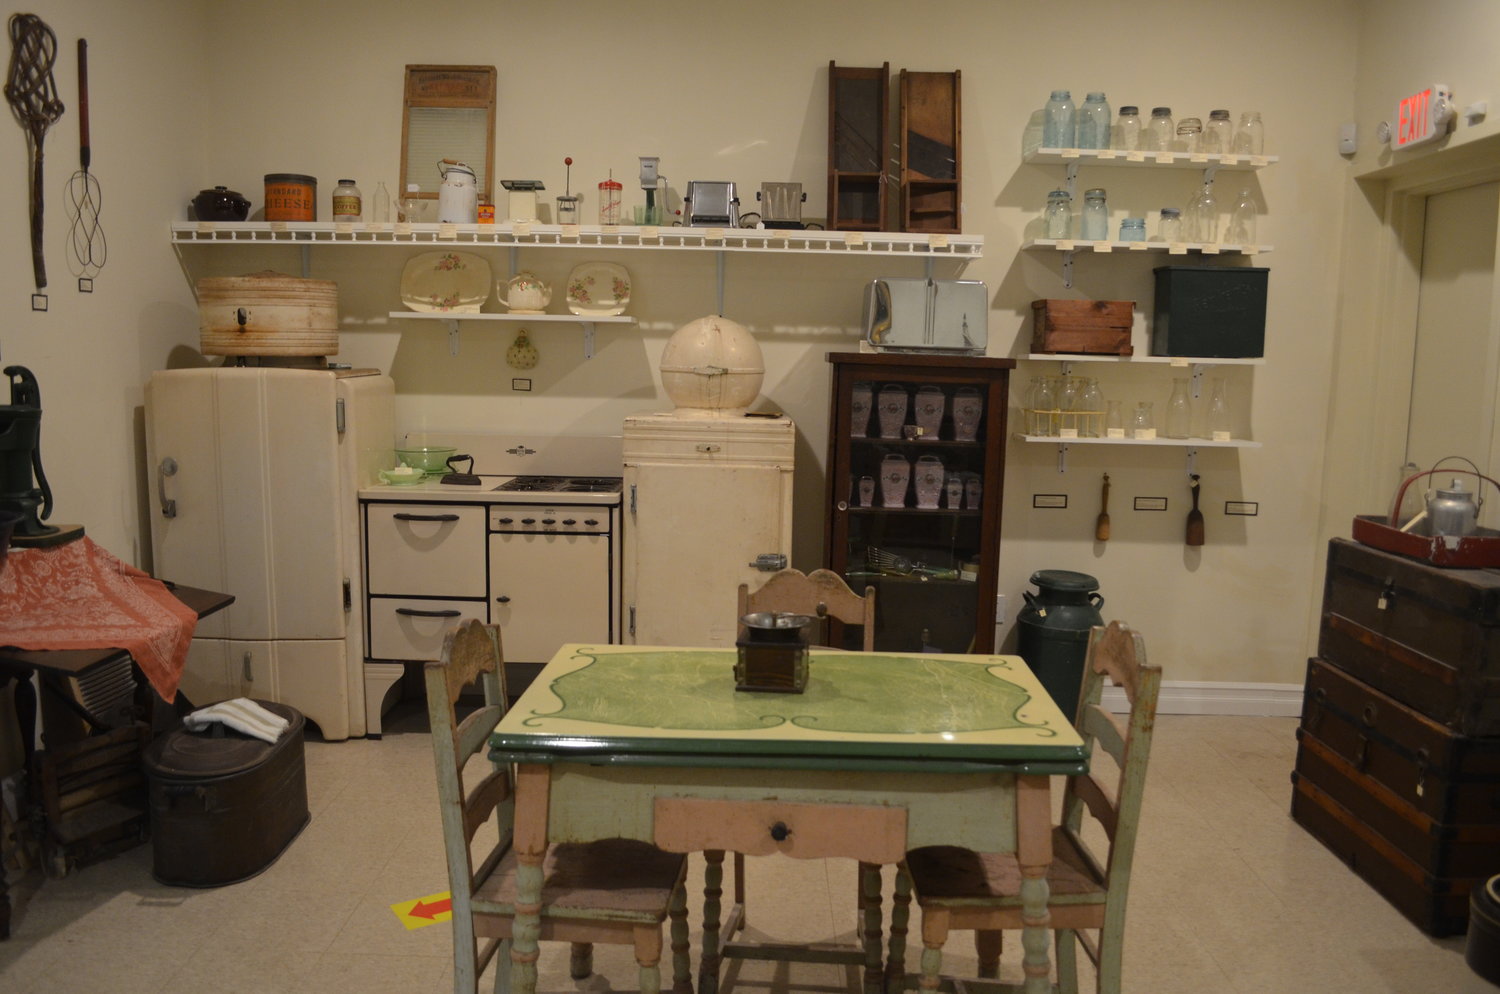 A replica of a 1900s kitchen display inside the Franklin Square Museum.